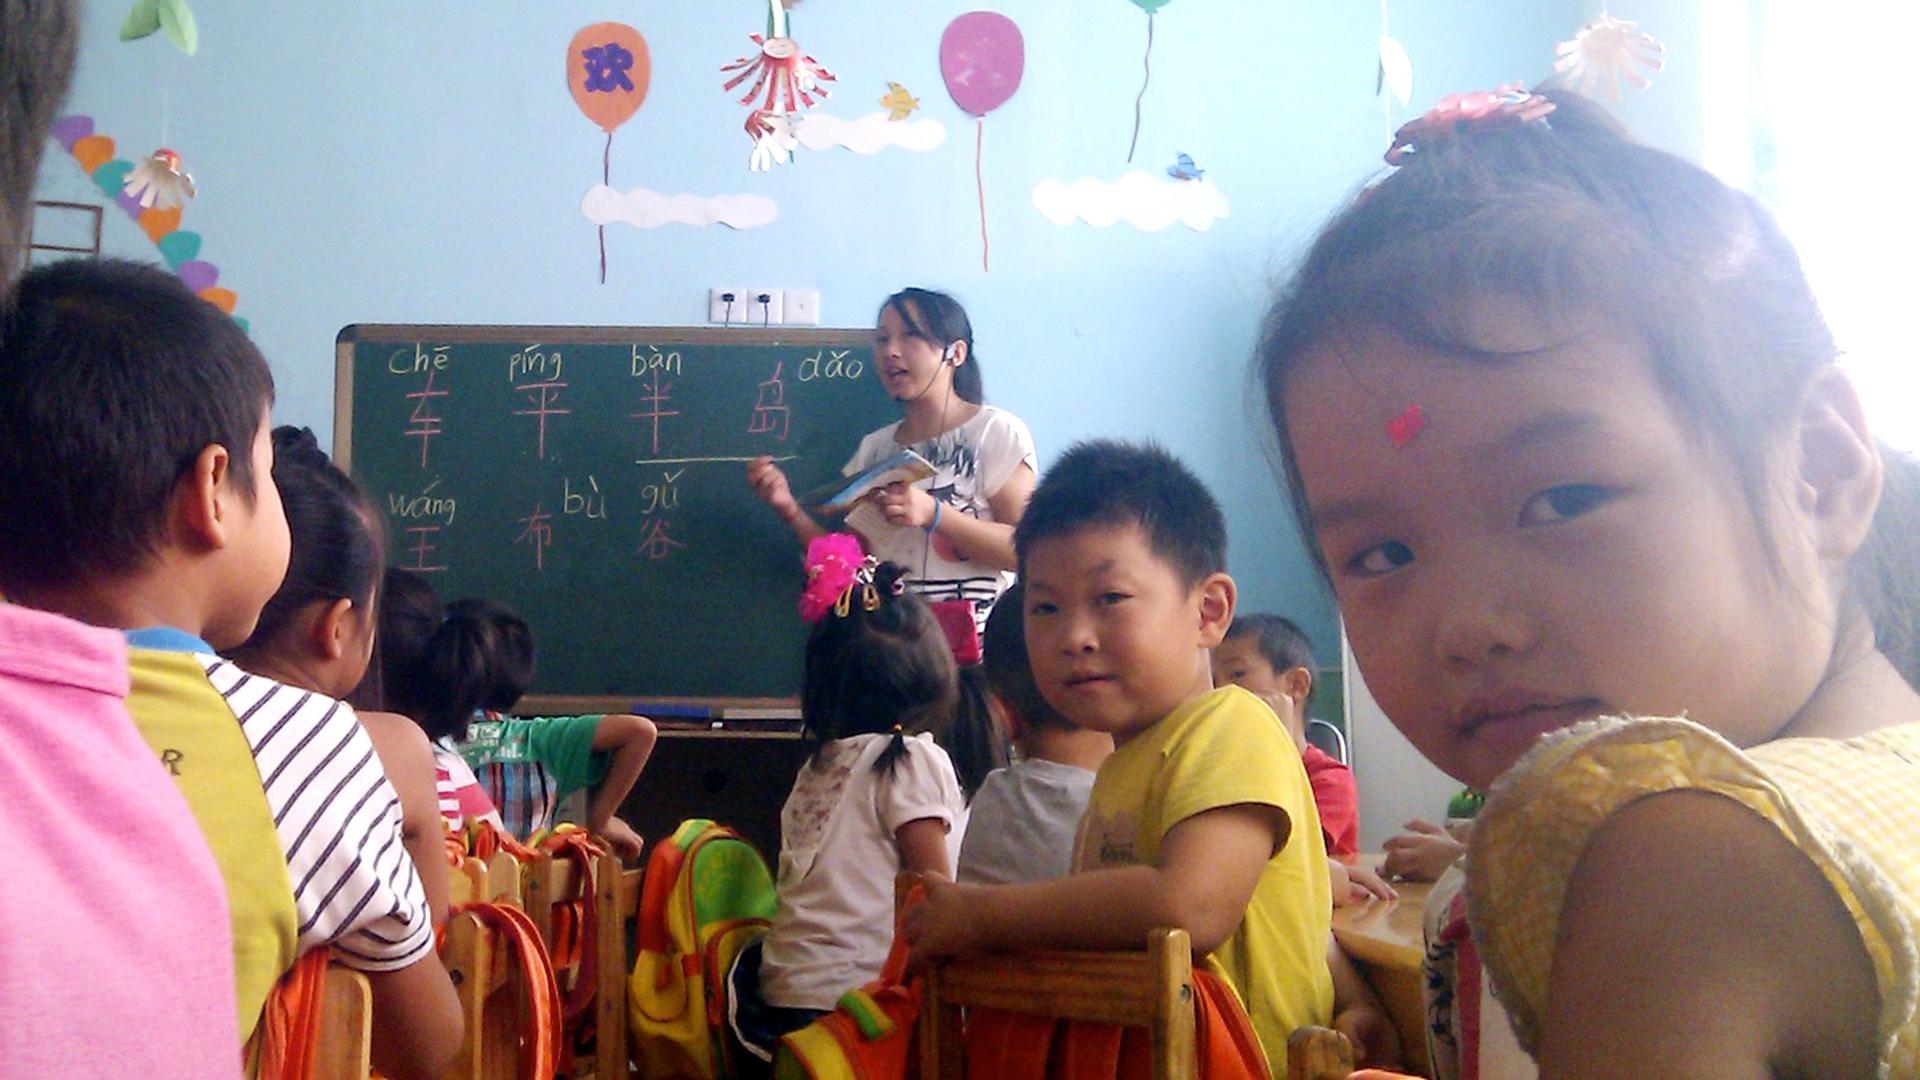 The children of migrant workers are taught Mandarin at a school in Shanghai. Many speak a regional dialect at home, and some don't speak Mandarin at all when they arrive for the first day of class.